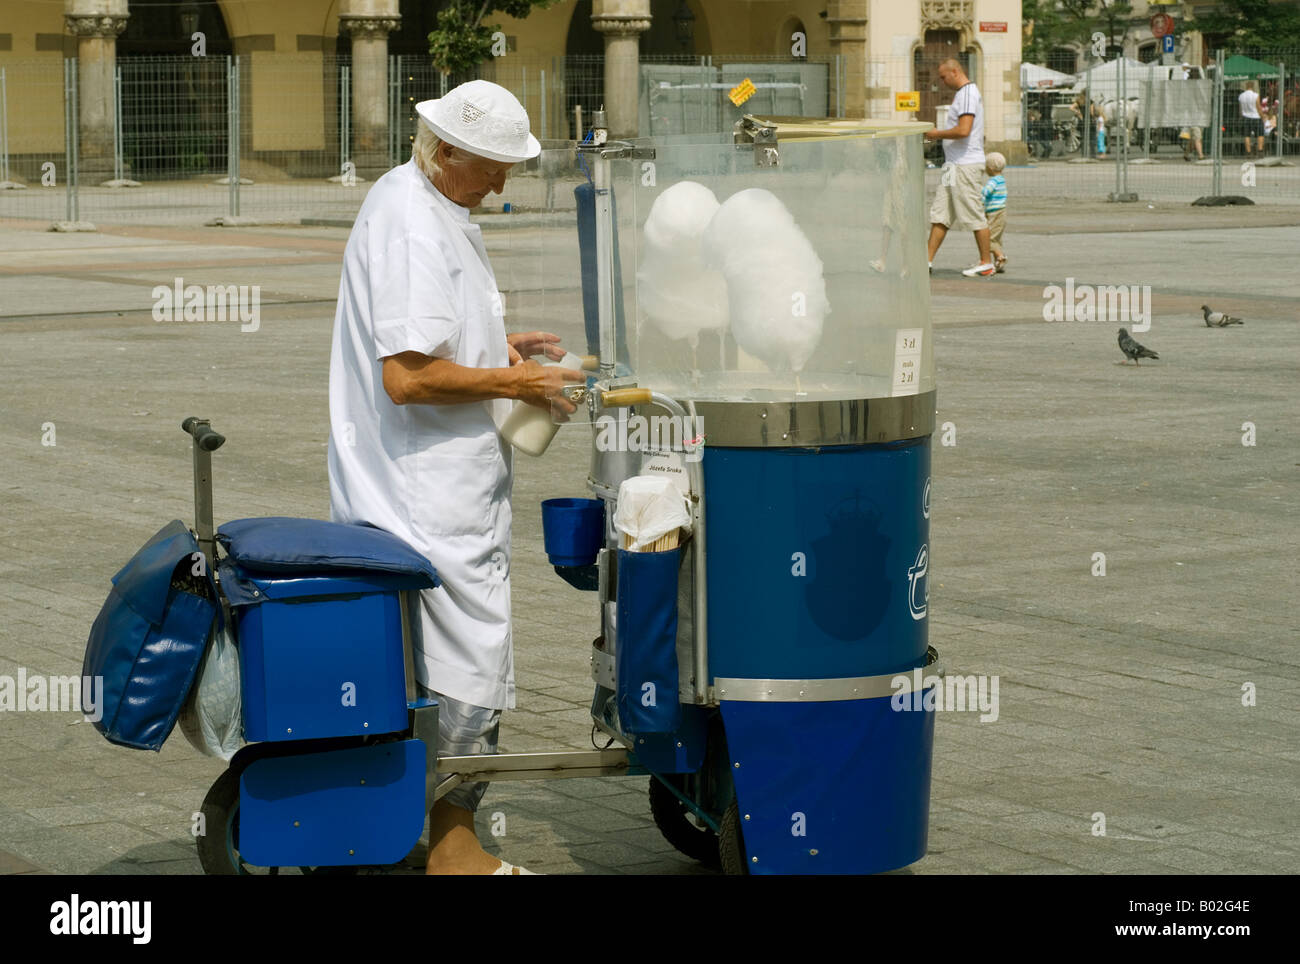 Woman selling white candy floss from blue scooter in Rynek Glowny medieval market square in Krakow,Poland,Eastern Europe Stock Photo